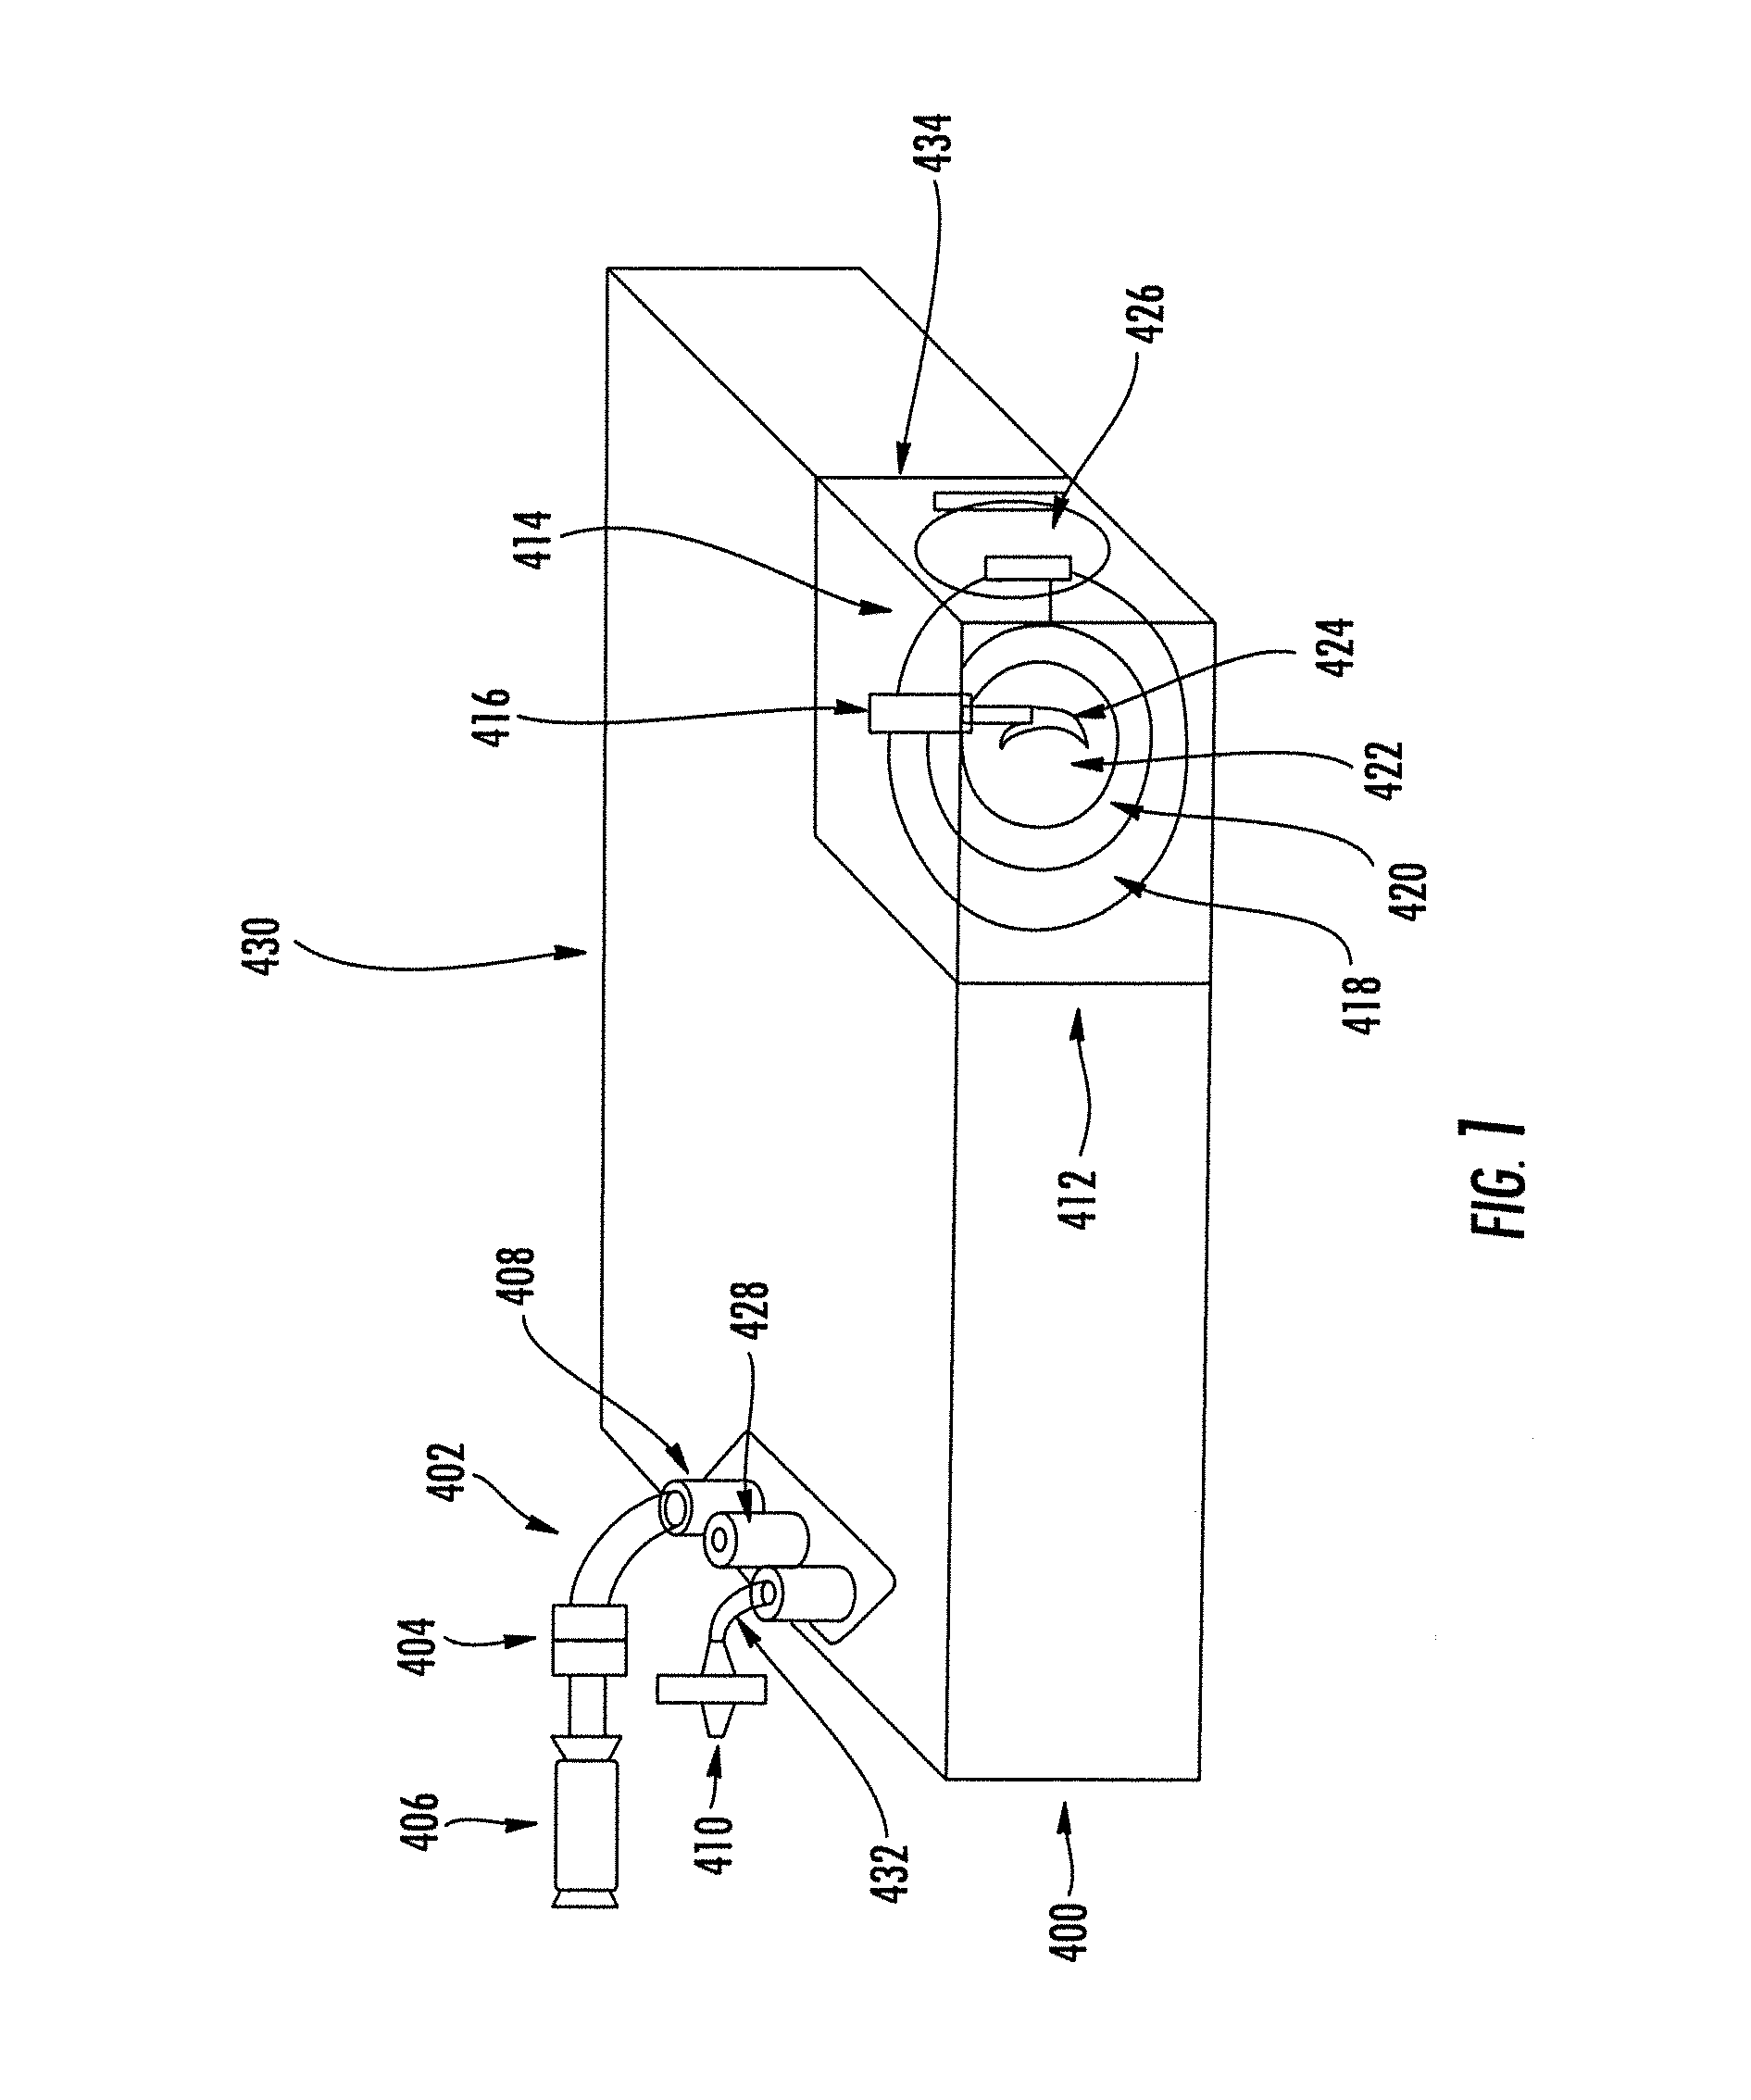 Container for accommodating at least one of at least one biologically active fluid and at least one preparatory fluid, and a method therefor